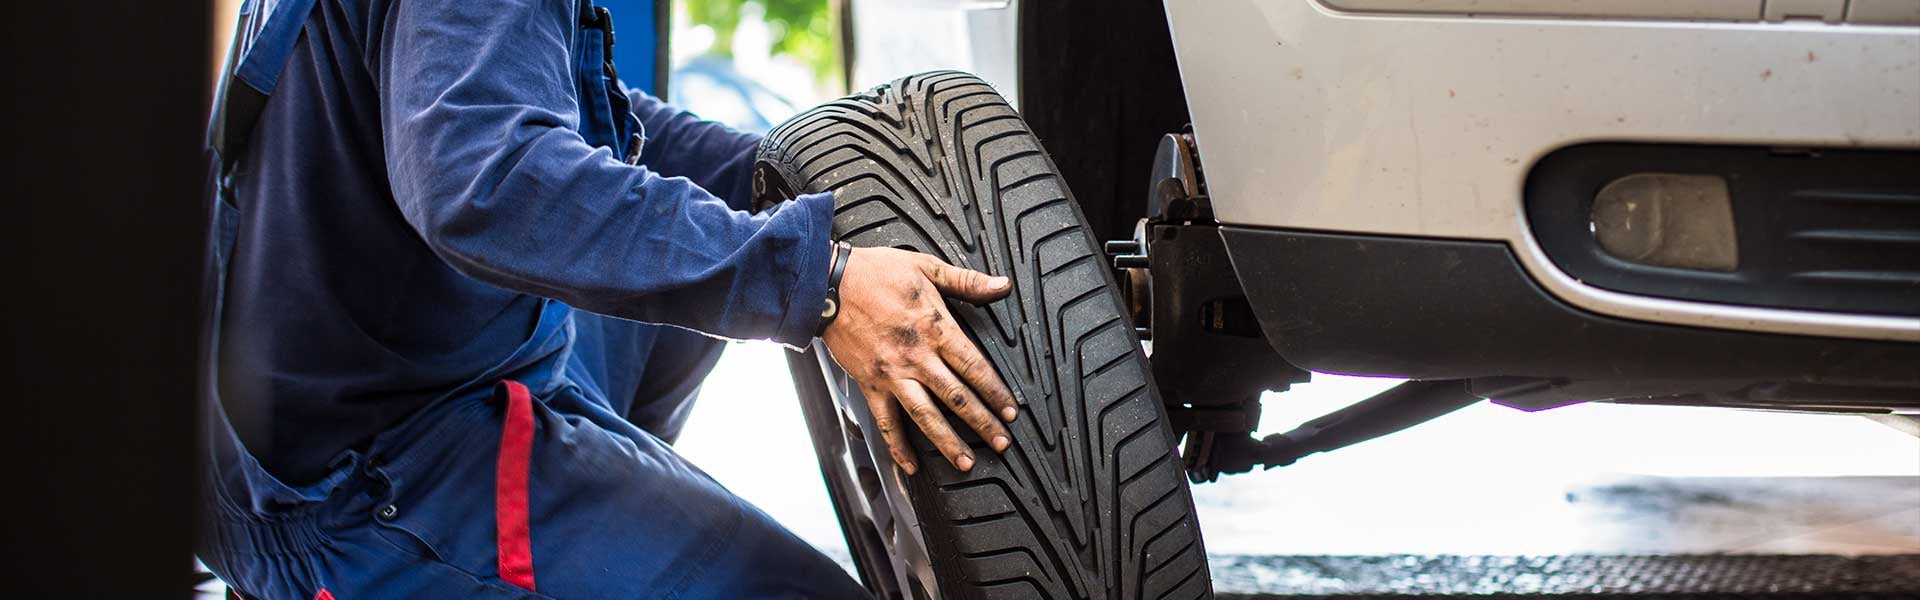 The Tire Replacement Process | Dale Howard Auto Center of Waverly in Waverly IA